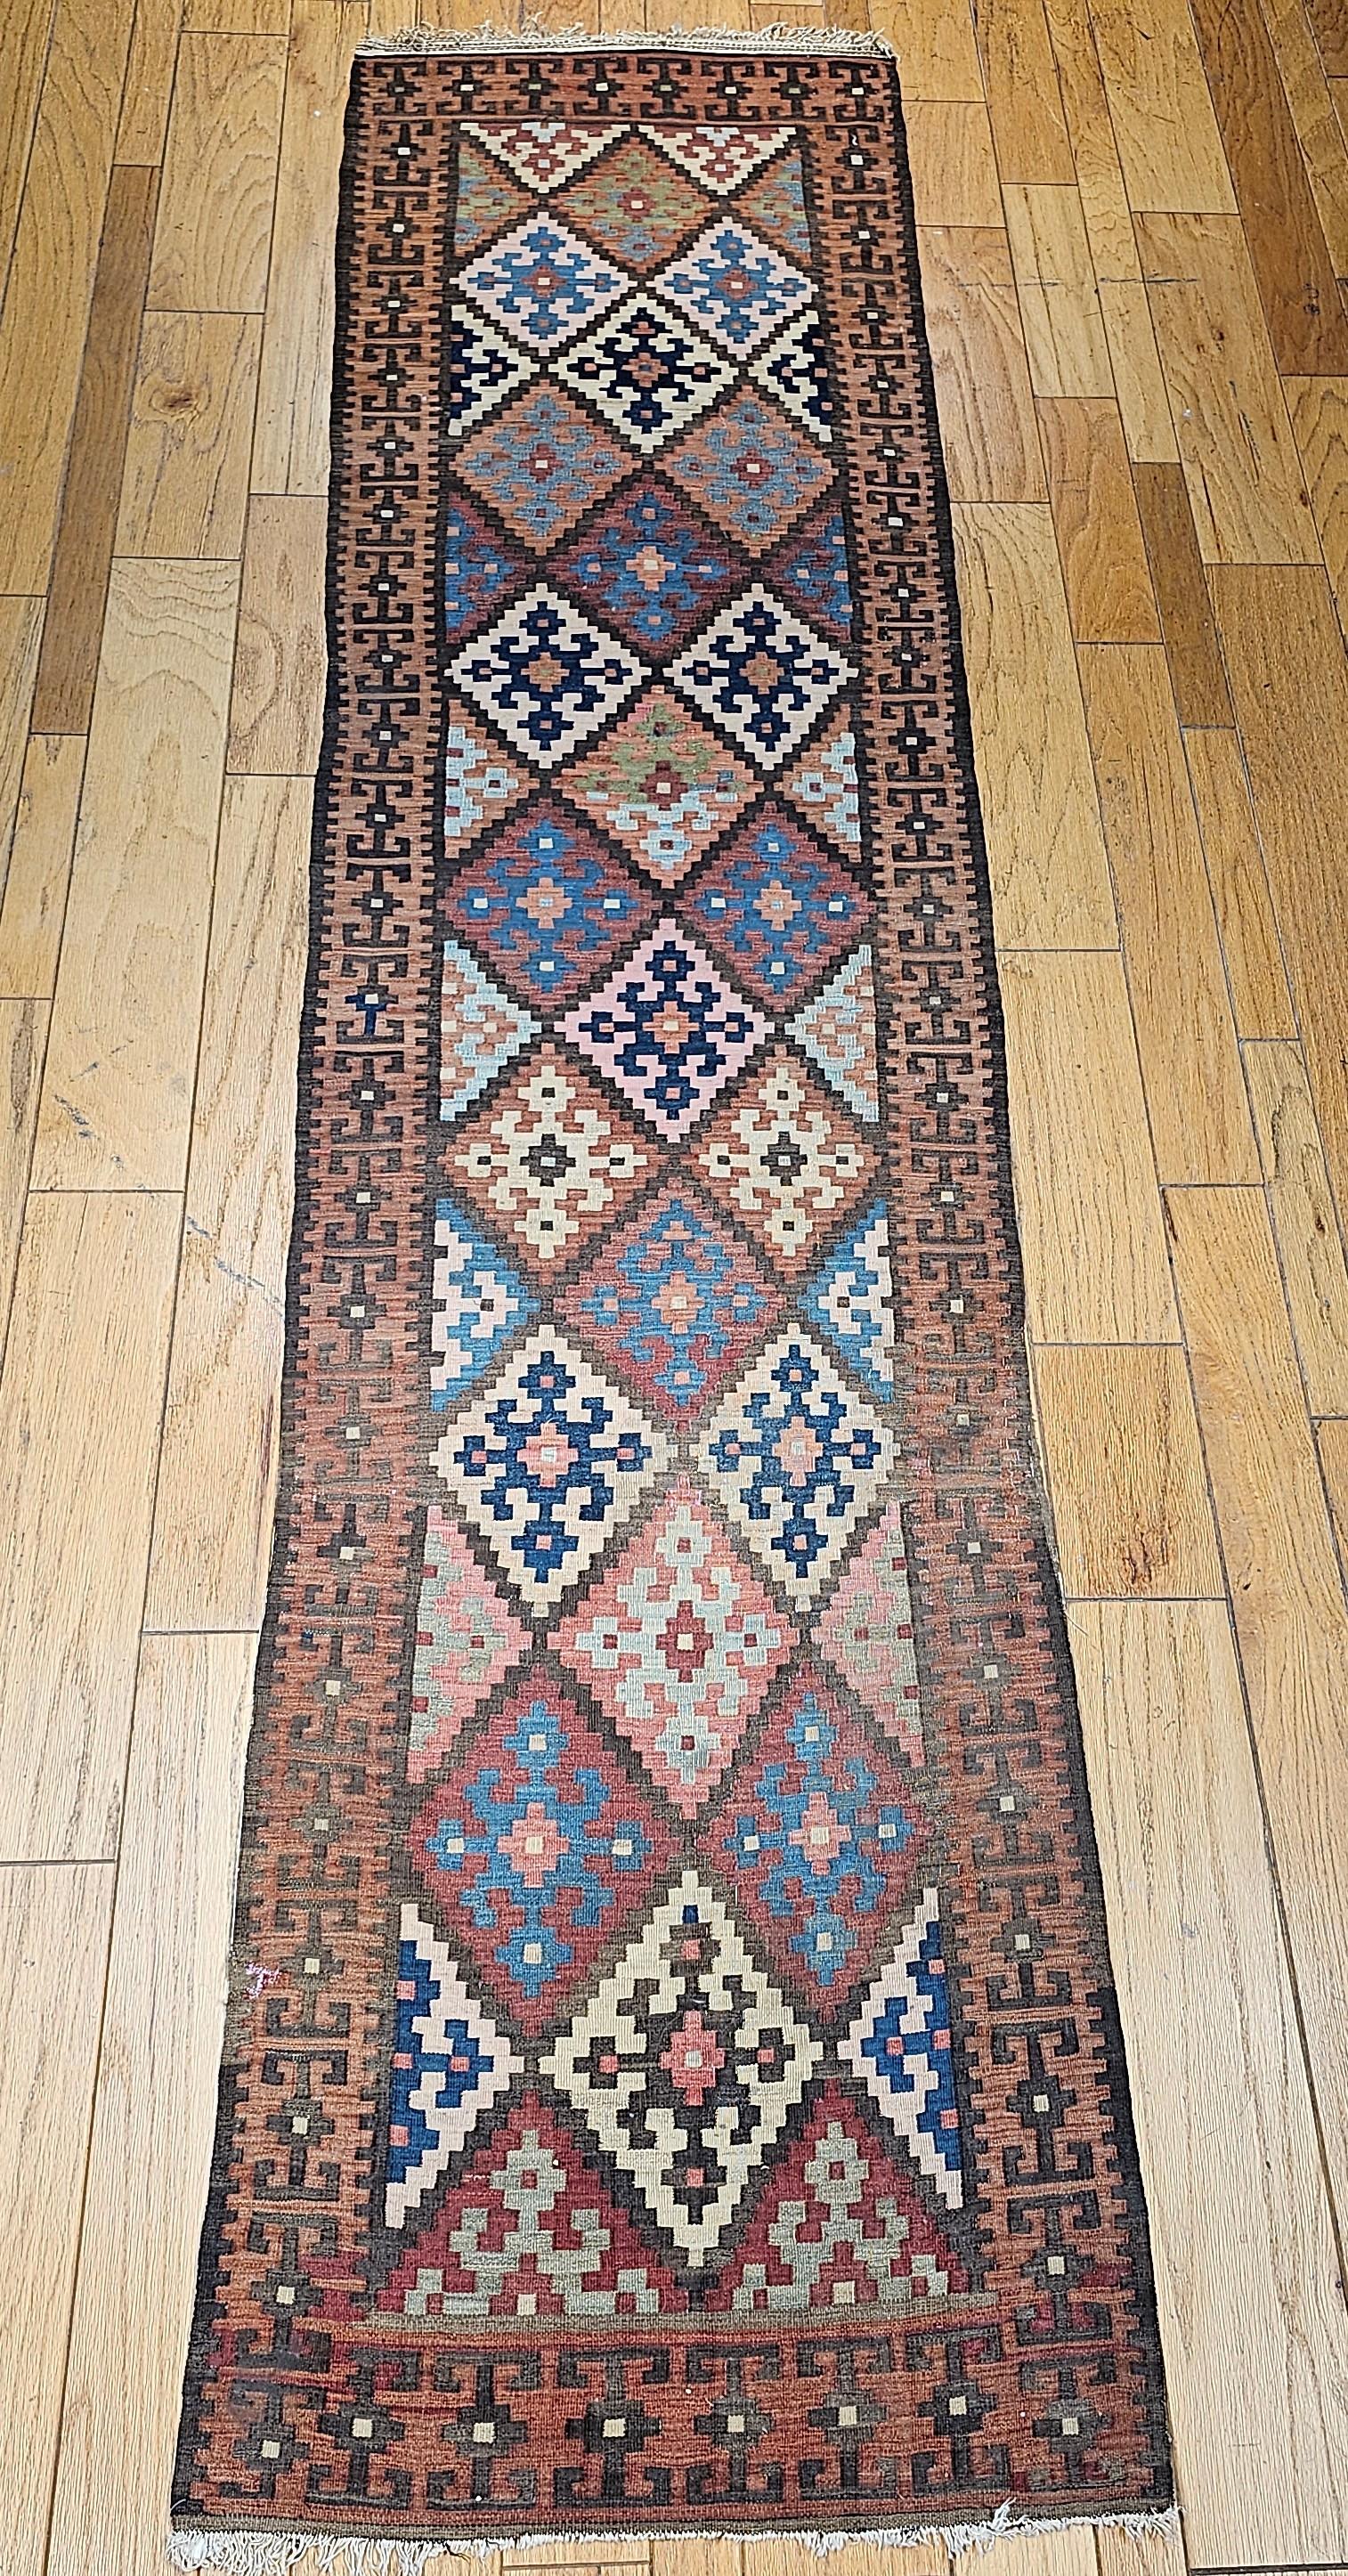 Vintage Persian Kilim (flat woven) runner is from the Varamin village (a city located on the ancient Silk Road) in north central Persia.  It has a brilliant geometric design and wonderful colors.   Beautiful Varamin Persian kilim runner in